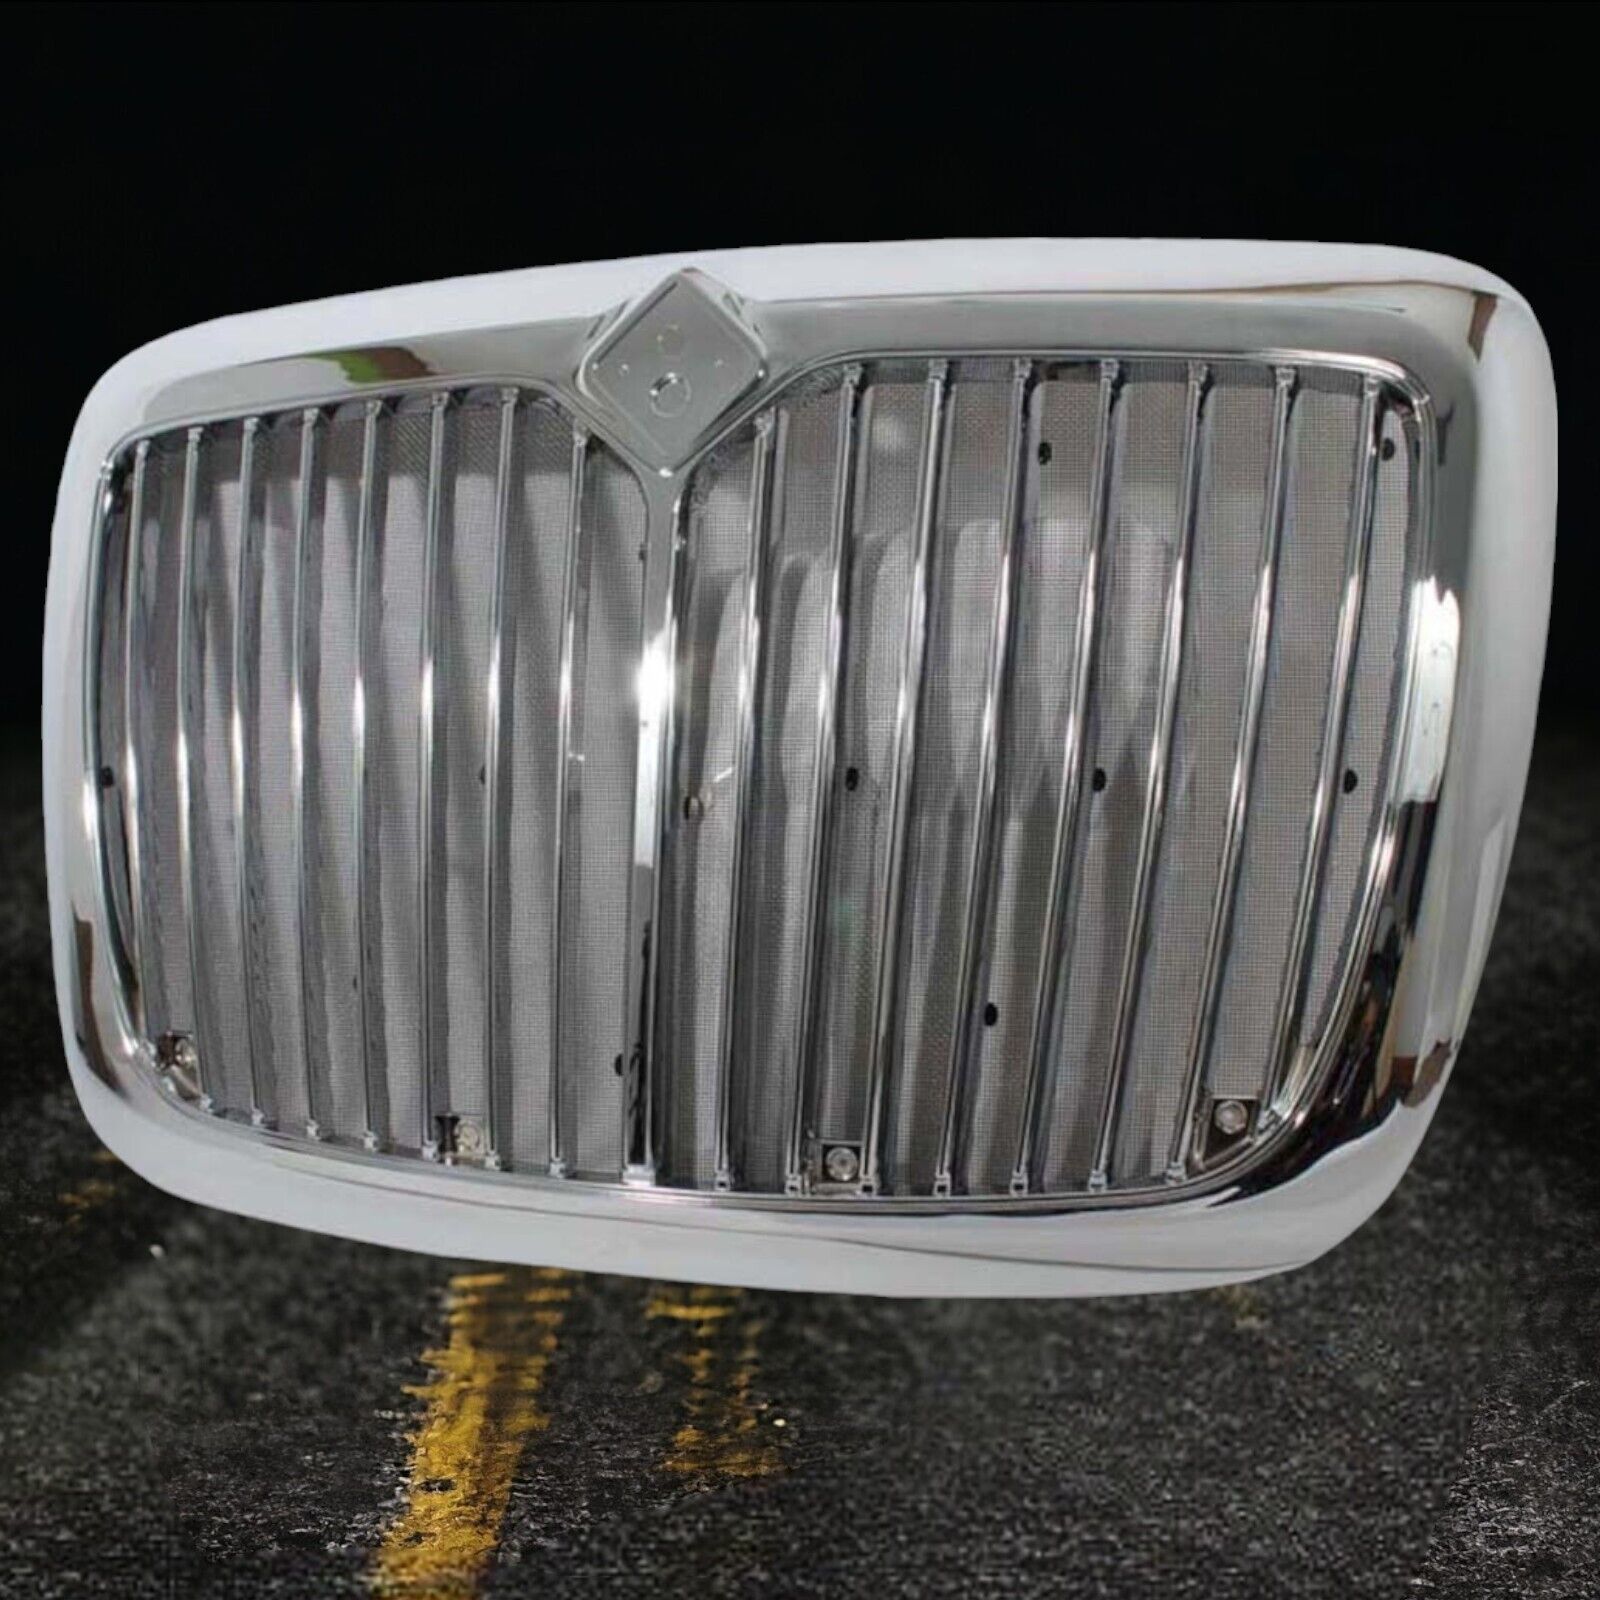 Grille Chrome Fits International Prostar With Screen 2008-2018 OE# 3612816C91 